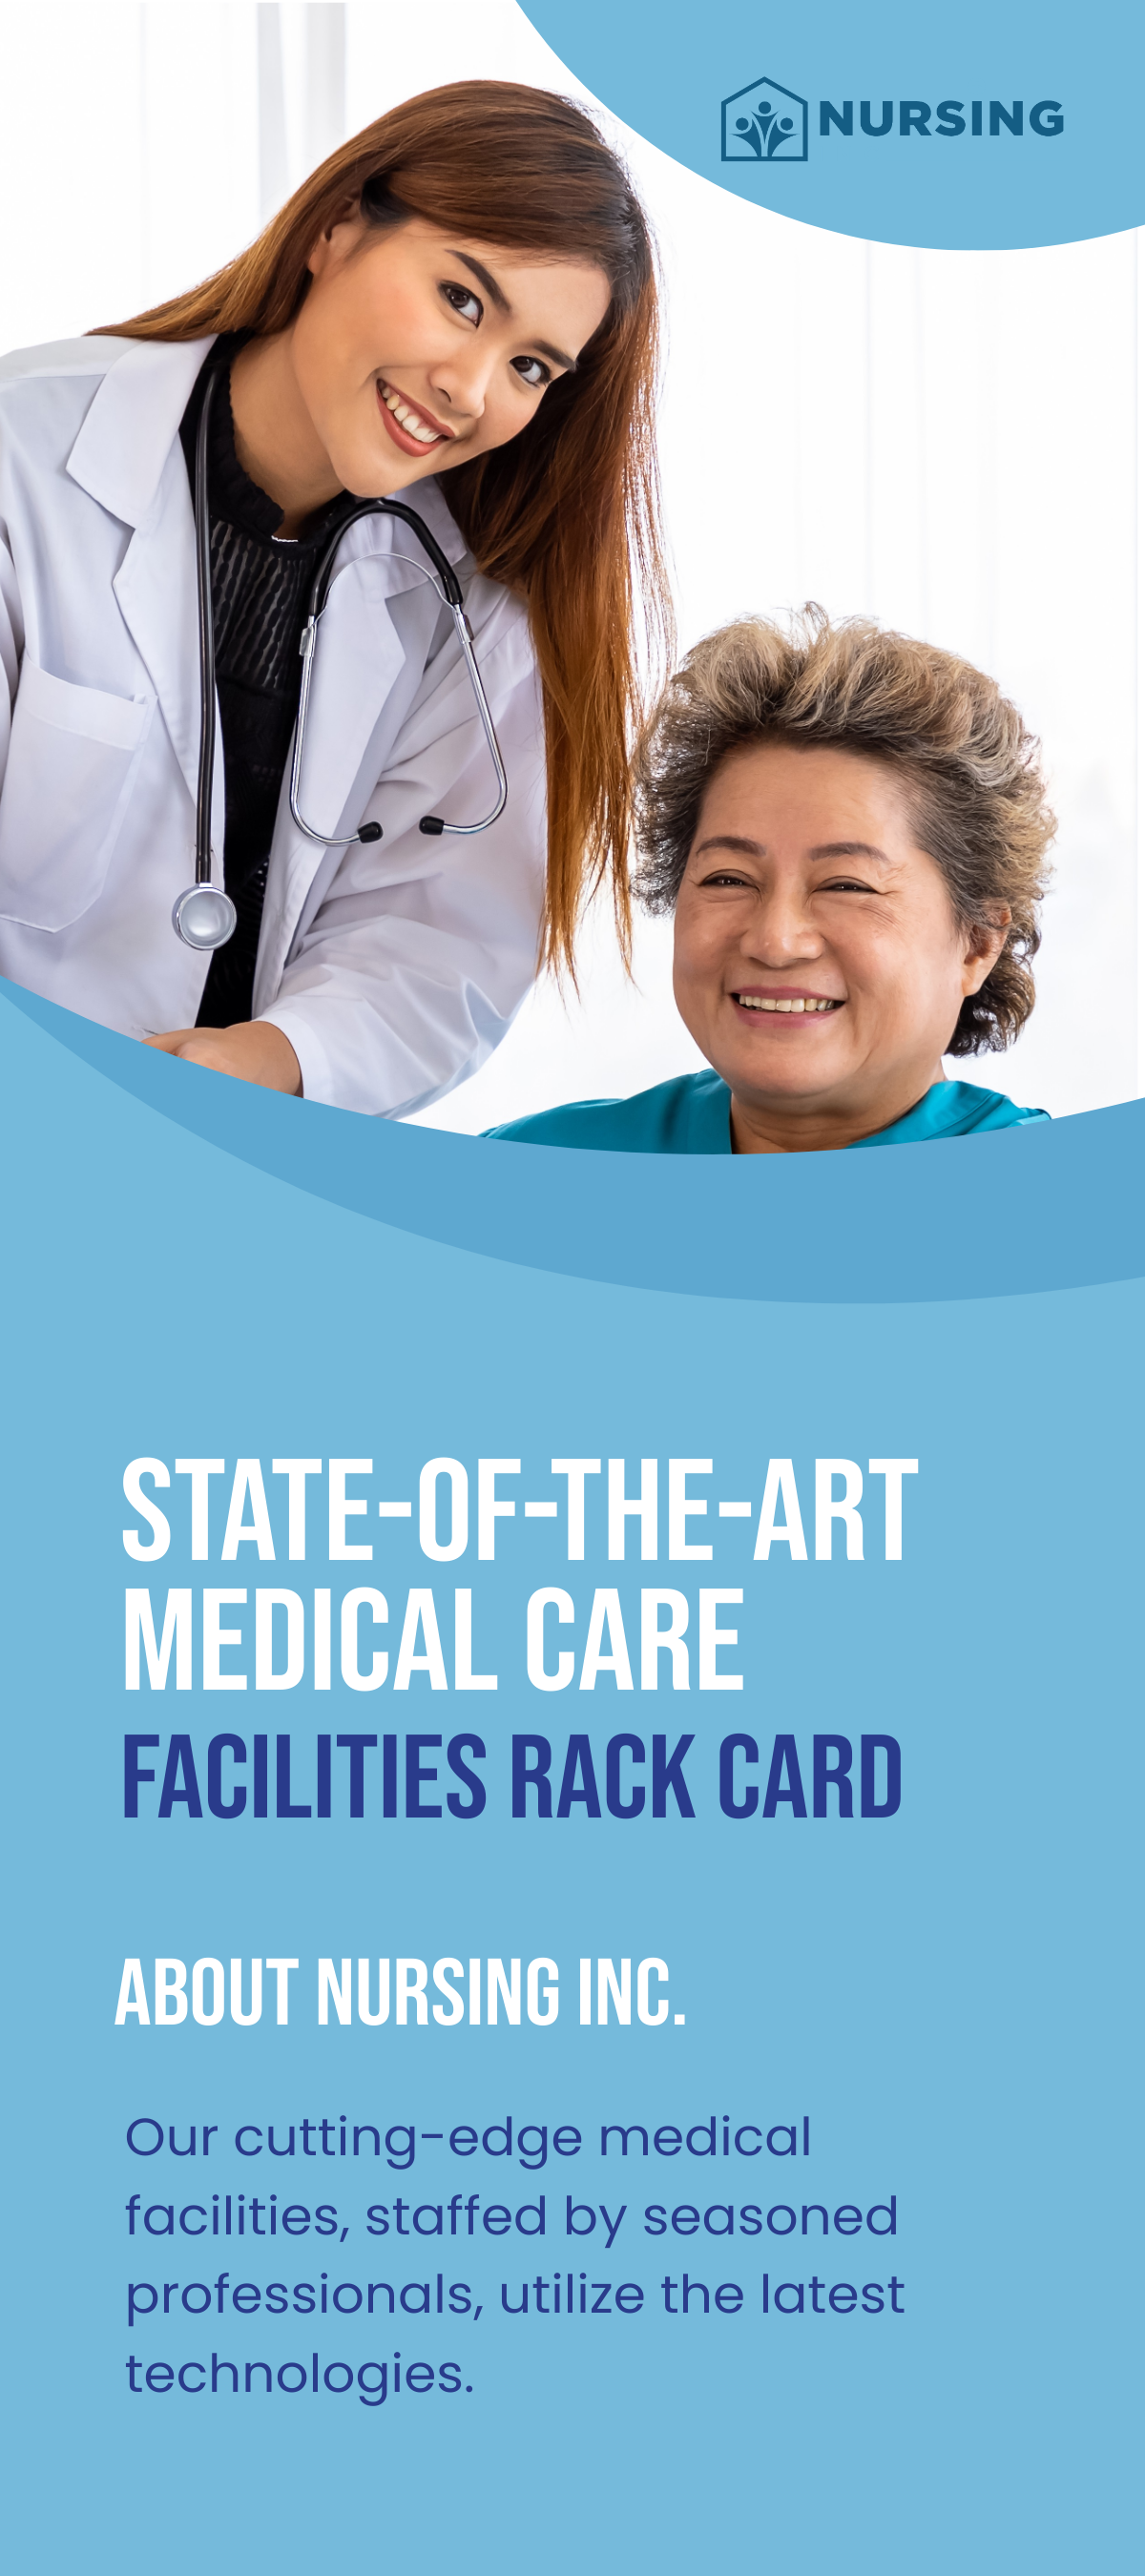 State-of-the-Art Medical Care Facilities Rack Card Template